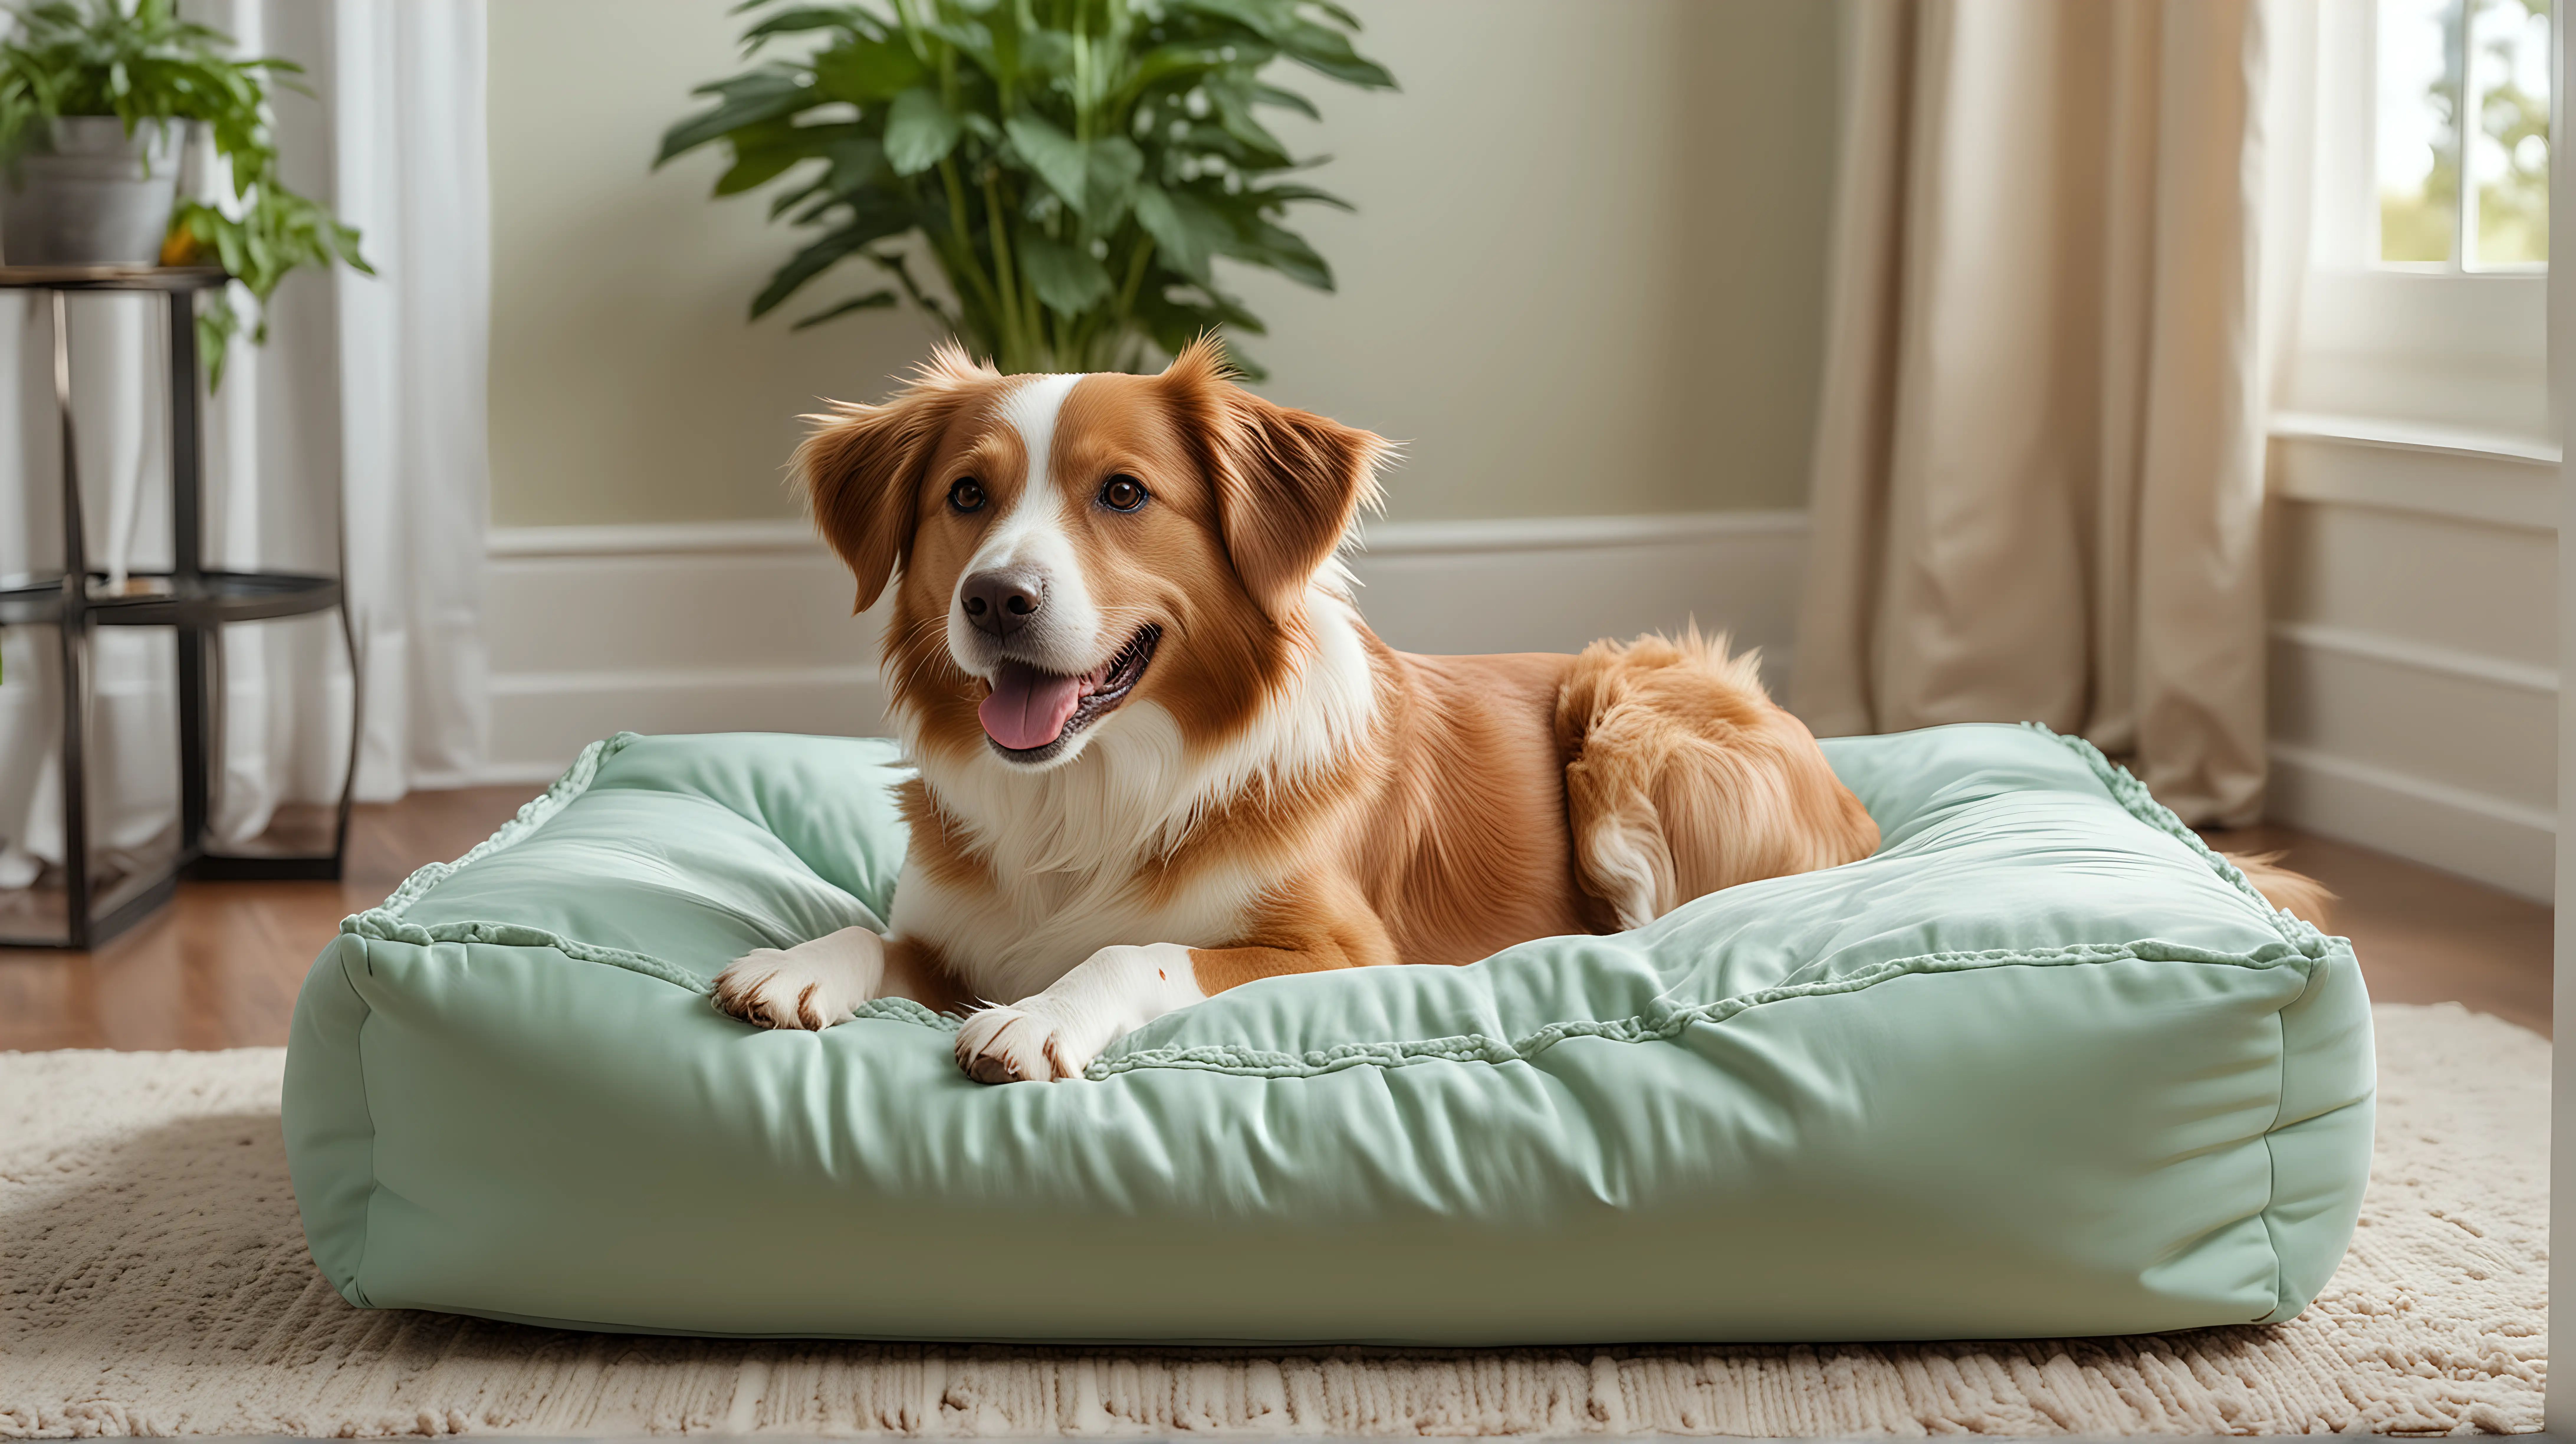 Happy Dog Relaxing on Luxurious Dog Bed in Elegant Home Setting